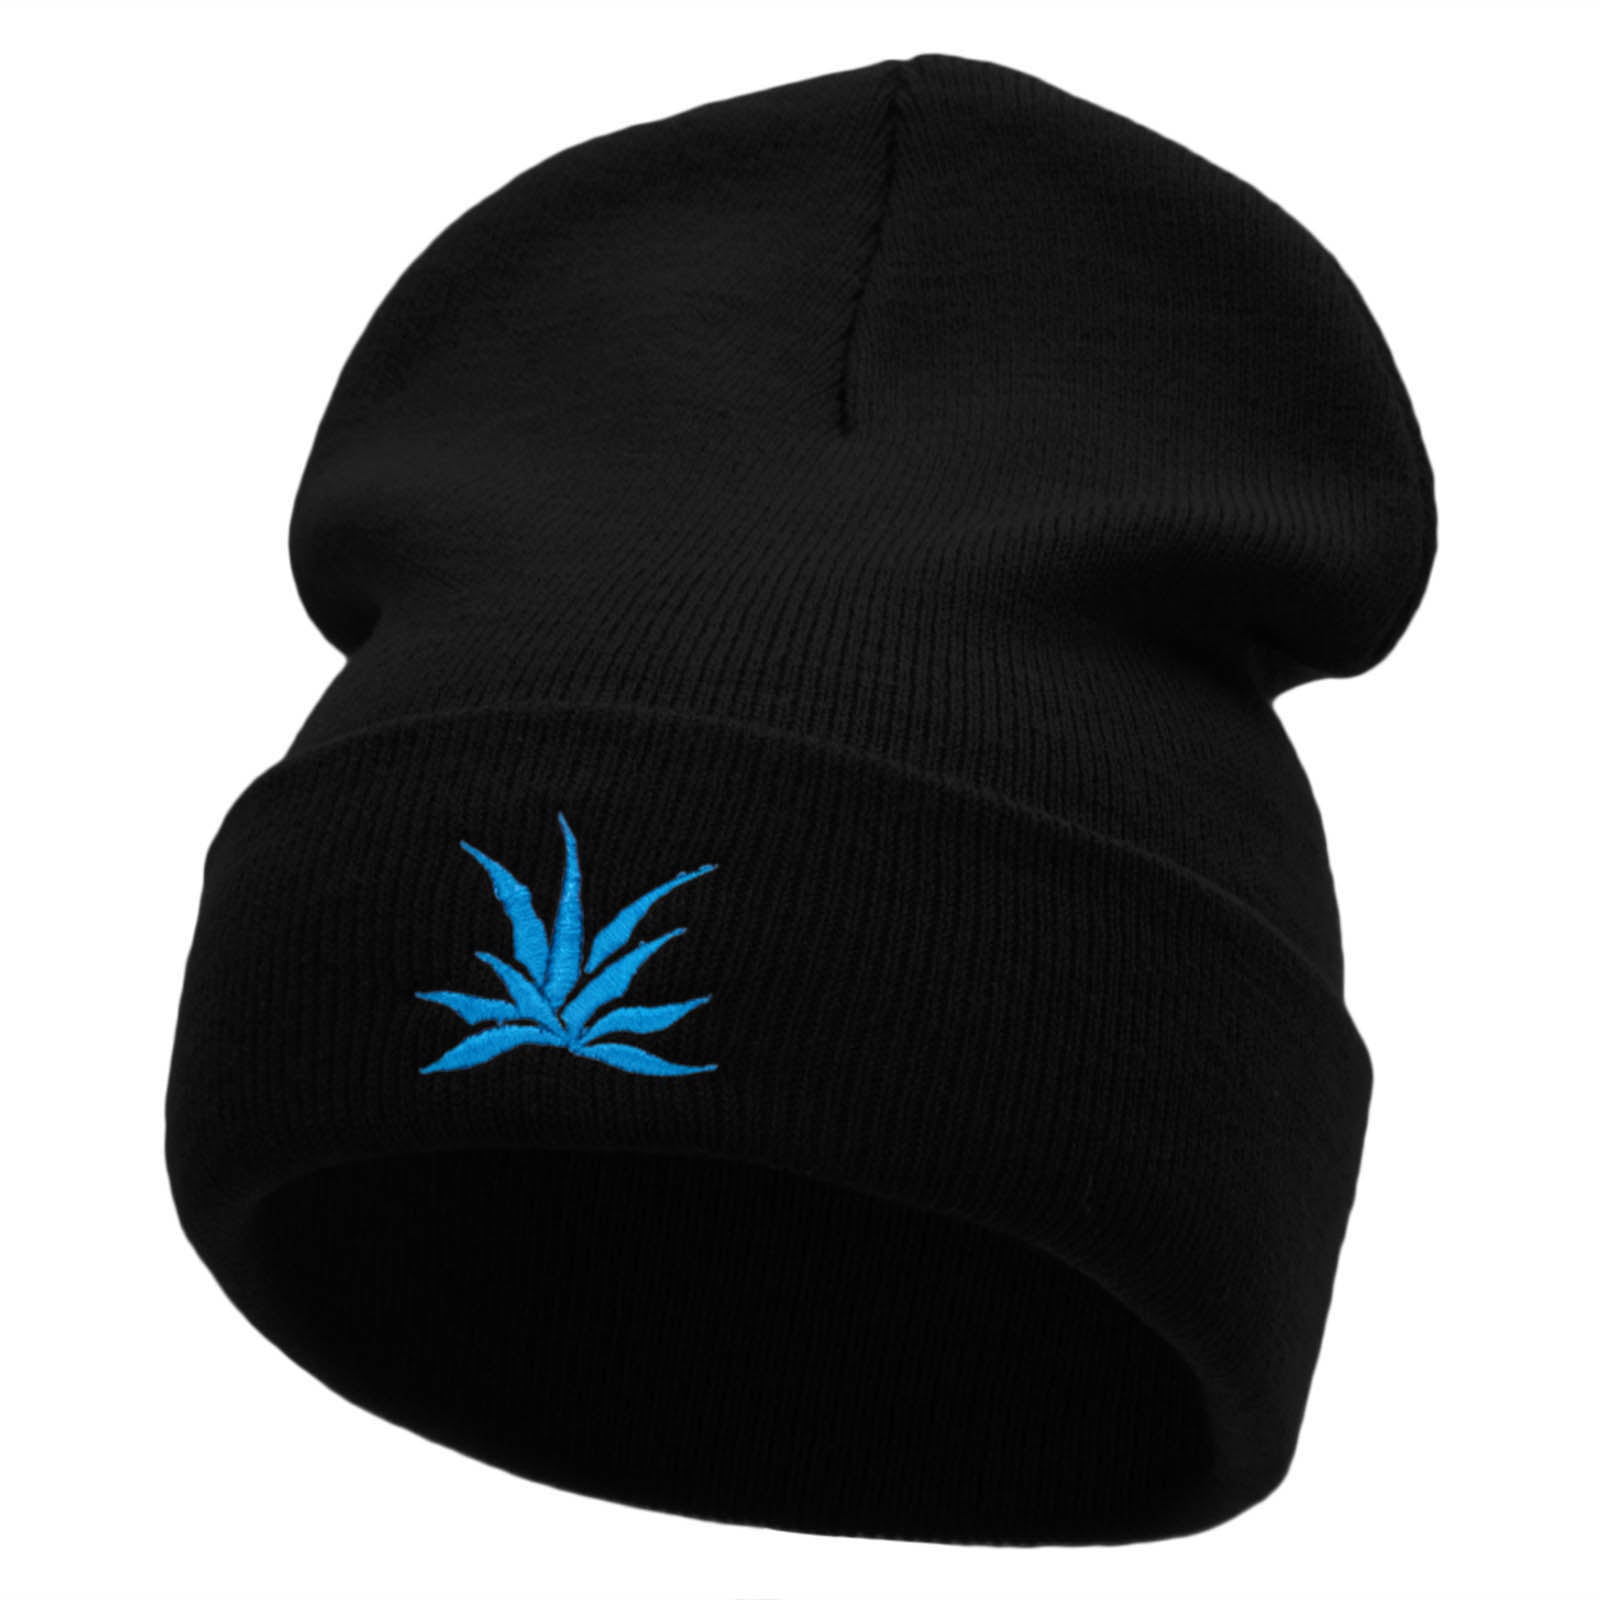 El Blue Agave Embroidered 12 Inch Long Knitted Beanie - Black OSFM